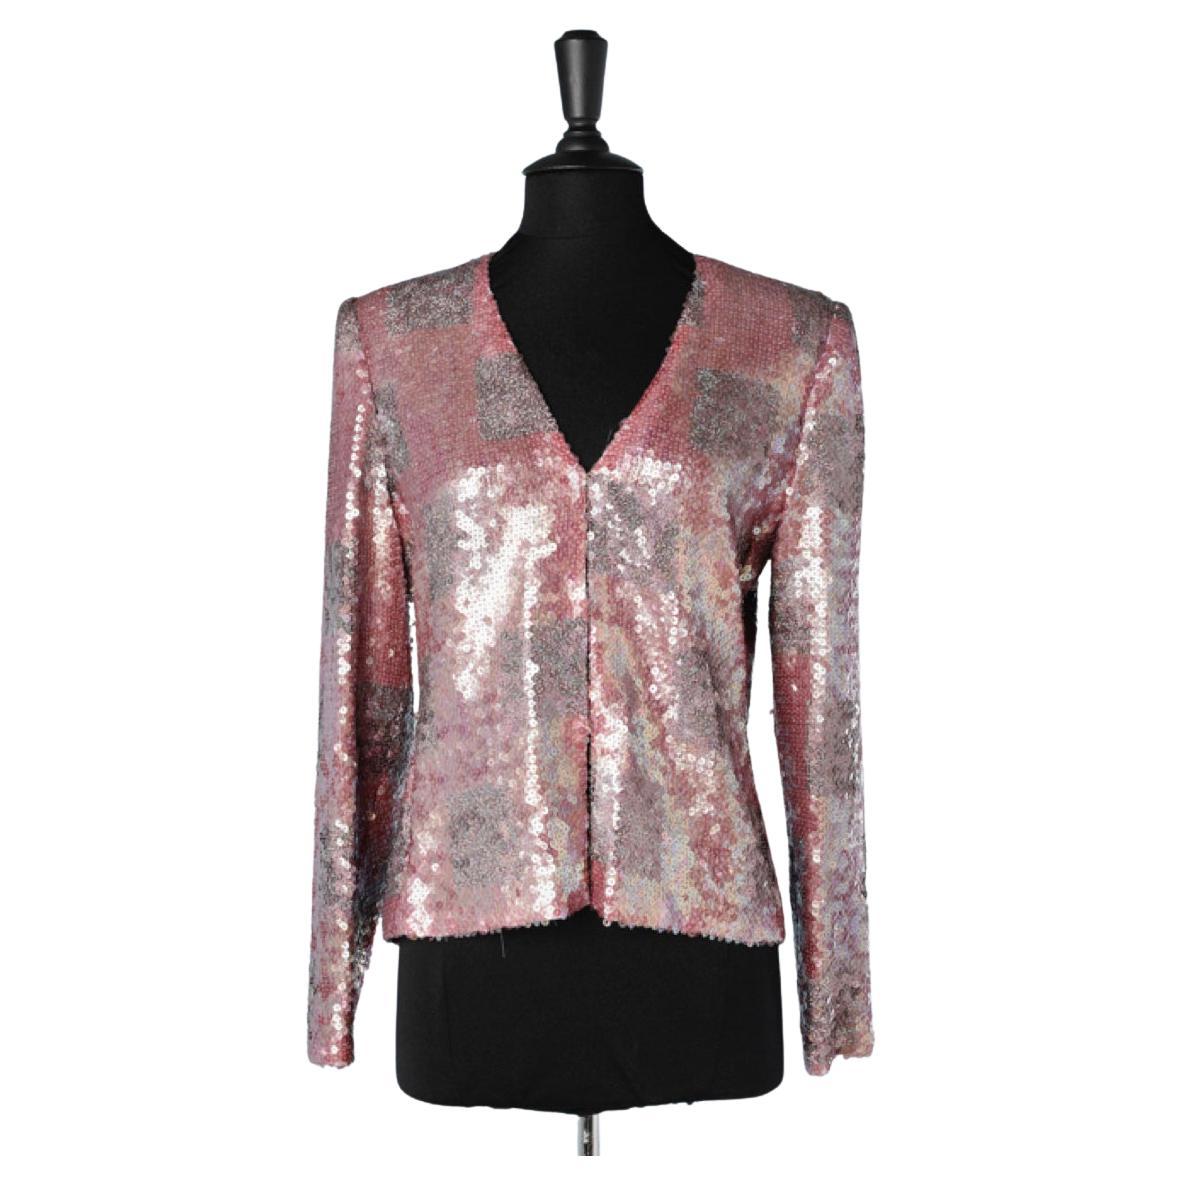 Edge to edge evening jacket with pink and iridescent sequins André Laug  For Sale